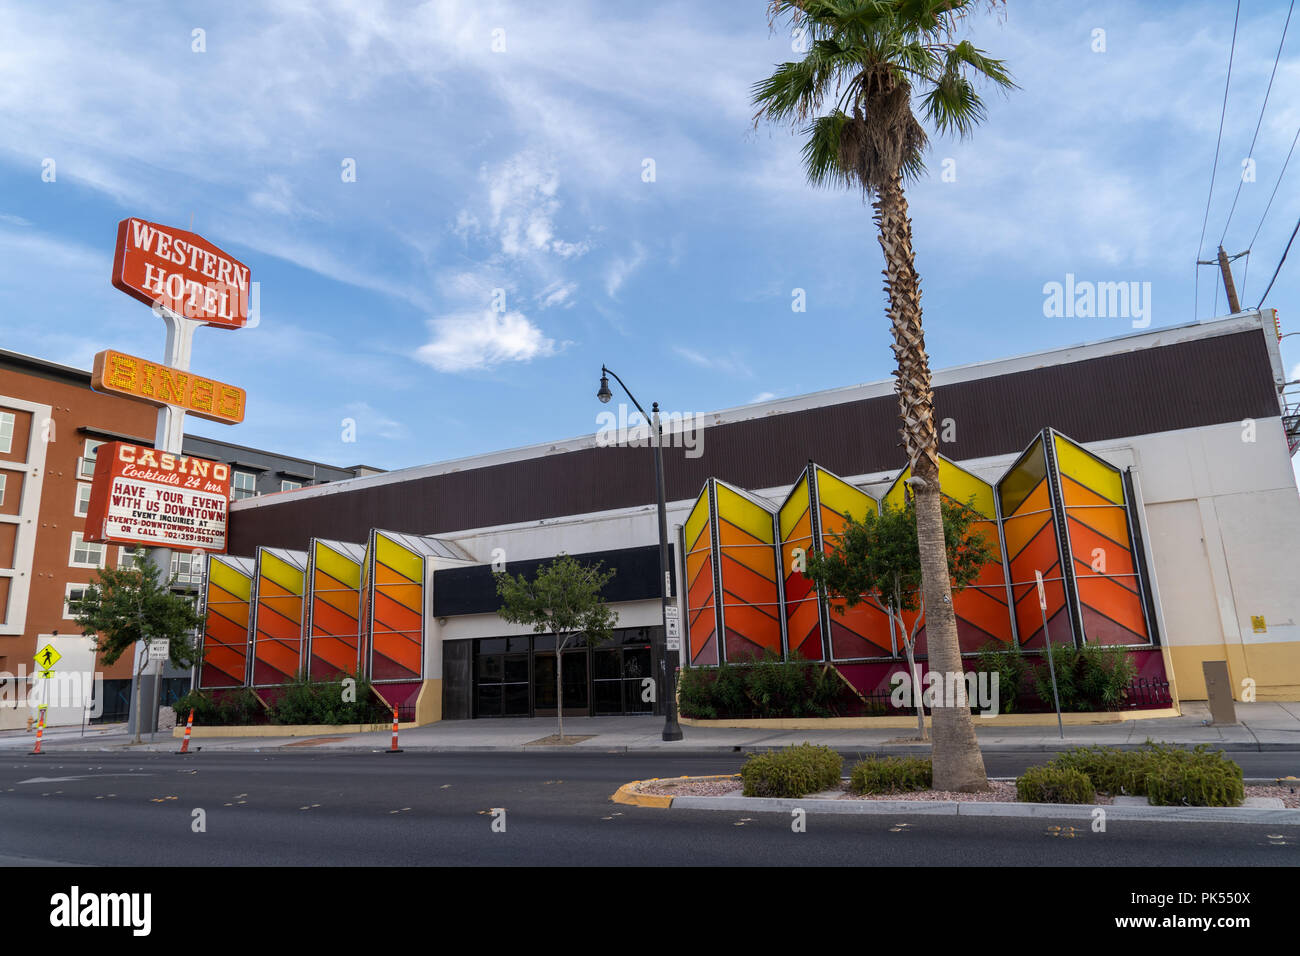 JULY 11 2018 Las Vegas, NV: The old Western Hotel Casino and Bingo Hall sits empty on Fremont Street in downtown. This is a know dive bar casino frequ Stock Photo